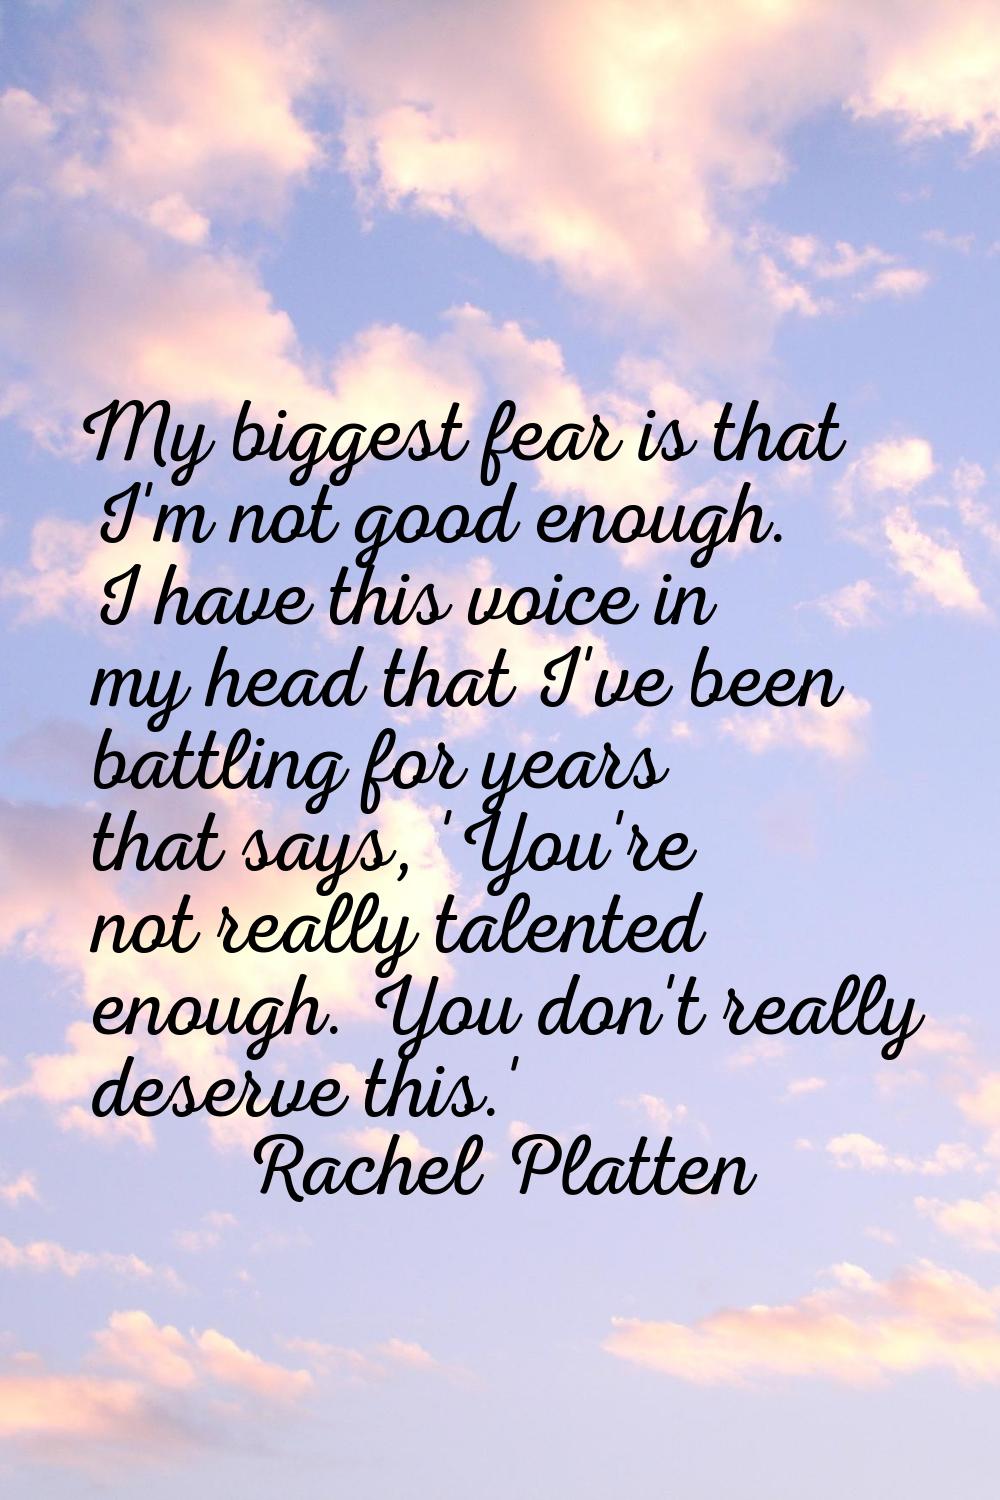 My biggest fear is that I'm not good enough. I have this voice in my head that I've been battling f